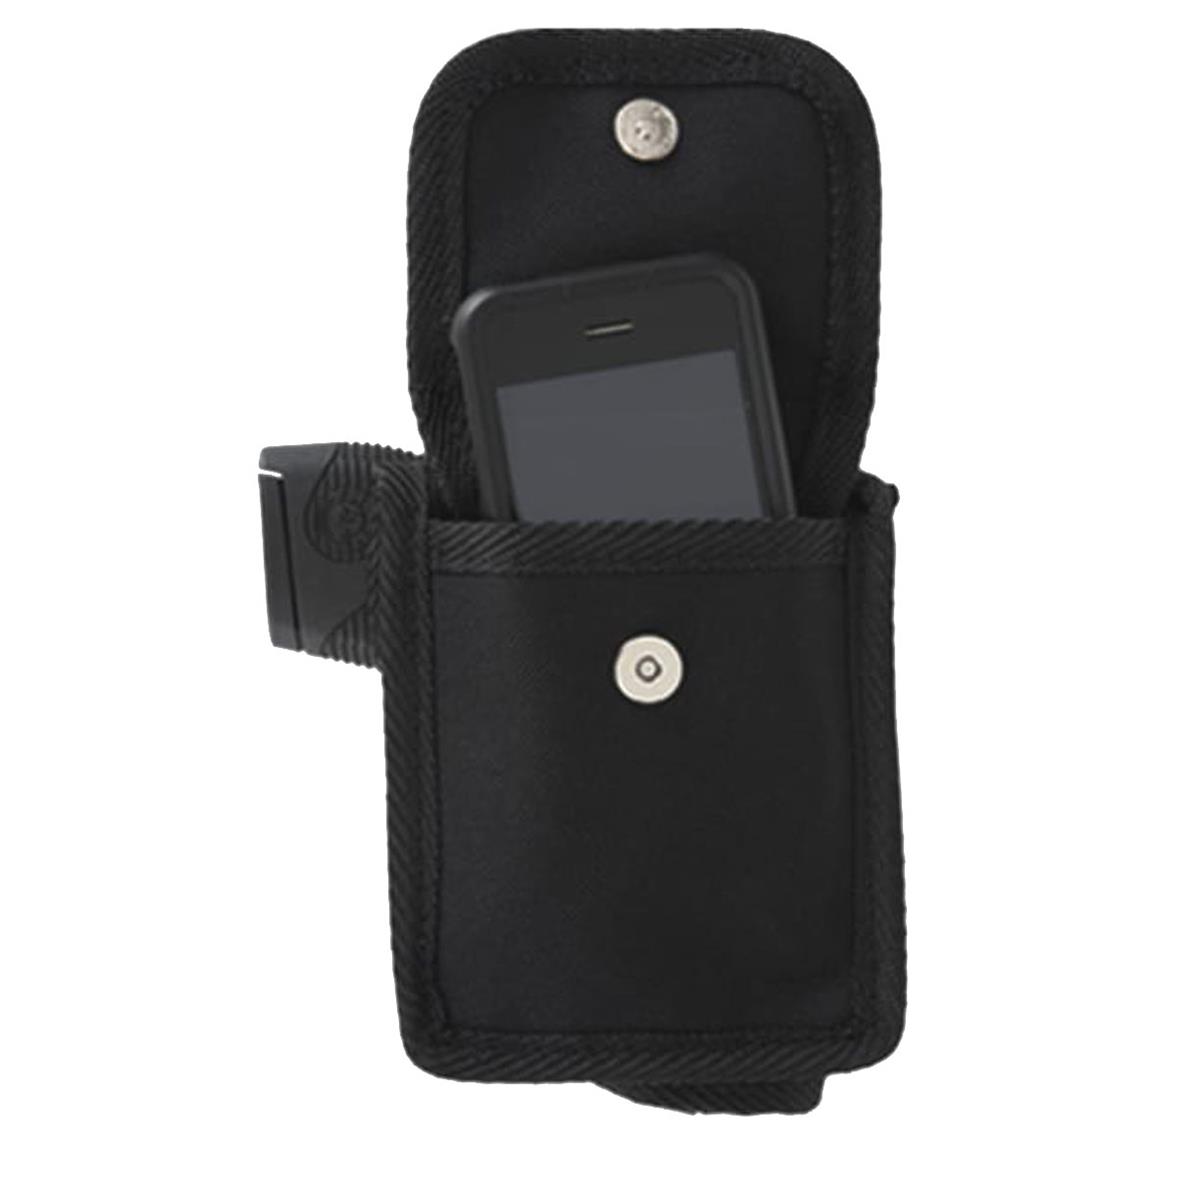 Image of Bulldog Nylon Inside the Pants Concealed Cell Phone Holster